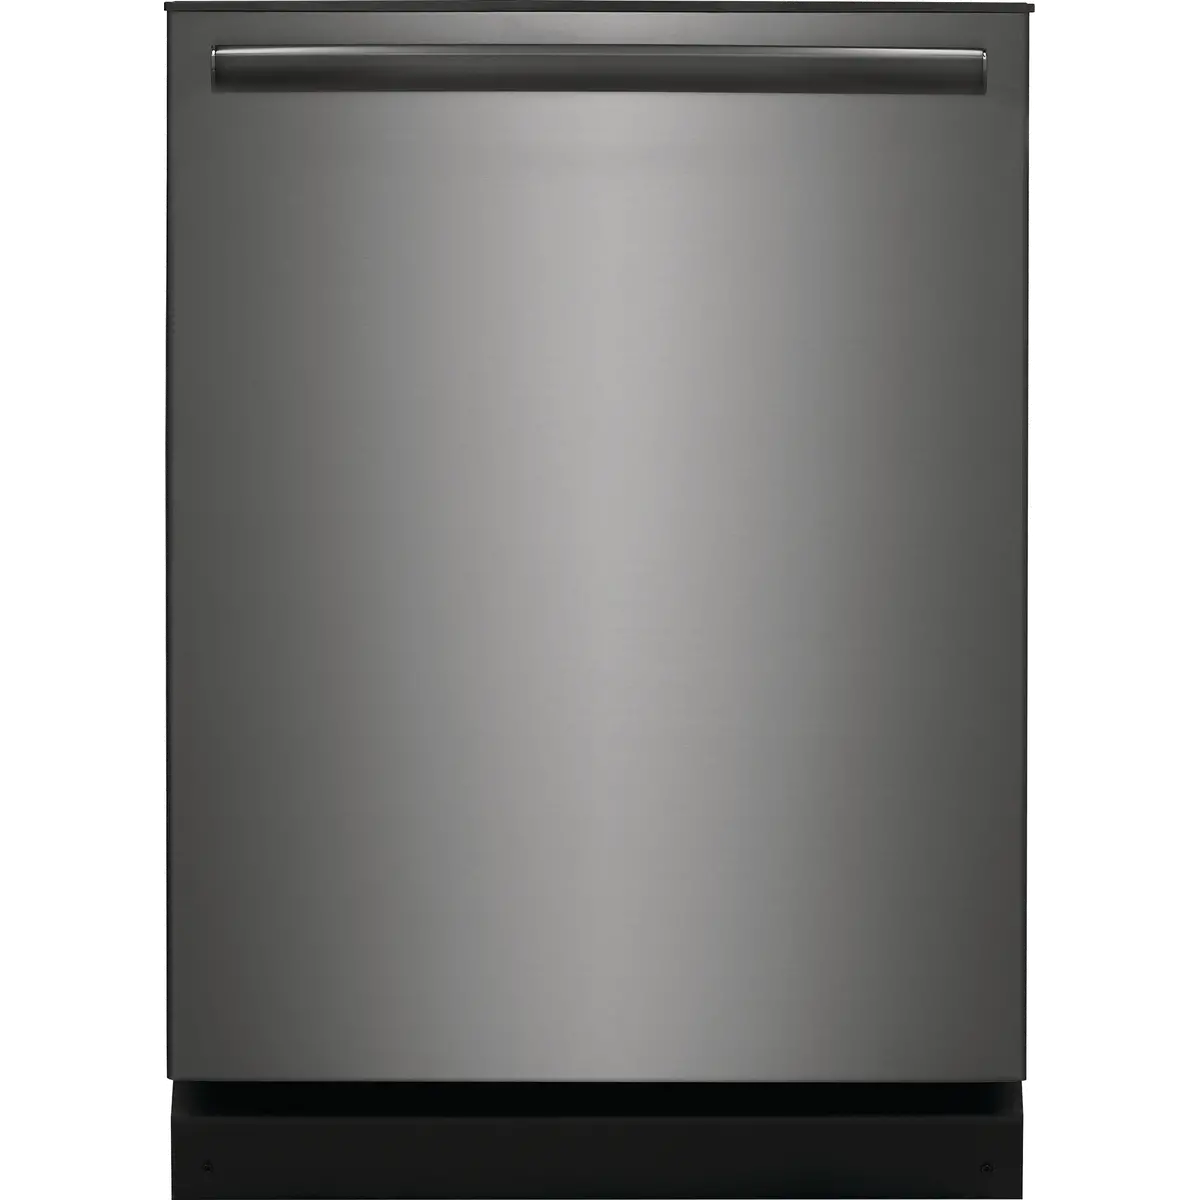 GDPH4515AD Frigidaire Gallery Top Control Dishwasher - Black Stainless Steel-1